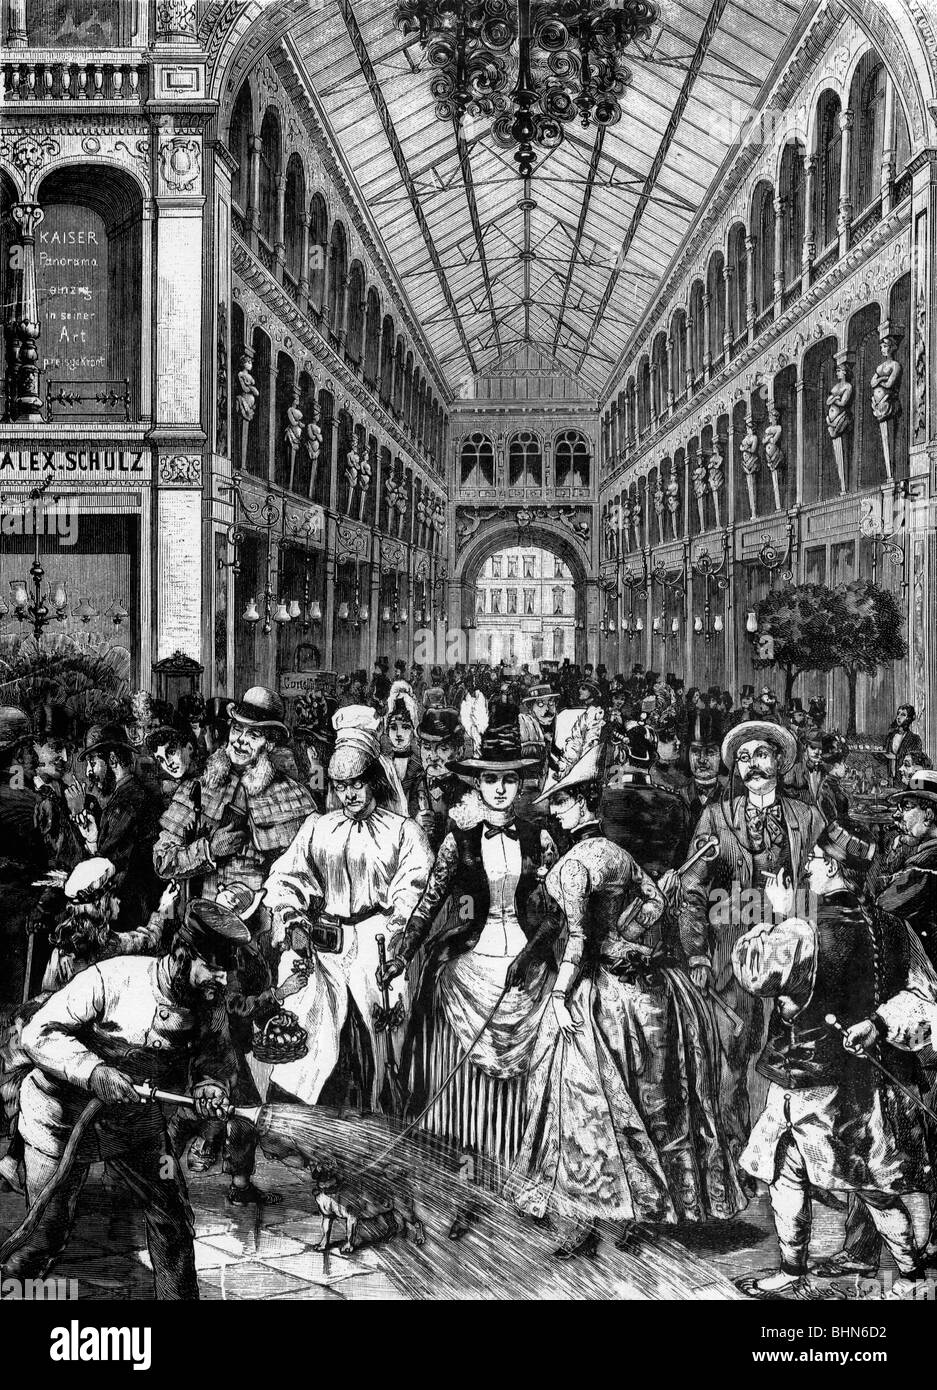 trade, shops, shopping mall in Berlin, Kaisergalerie, wood engraving after sketch by W. Busch, 19th century, historic, historical, Germany, market, water hose, shop, arcade, people, crowd, women, men, dog, leash, spraying, female, woman, Stock Photo